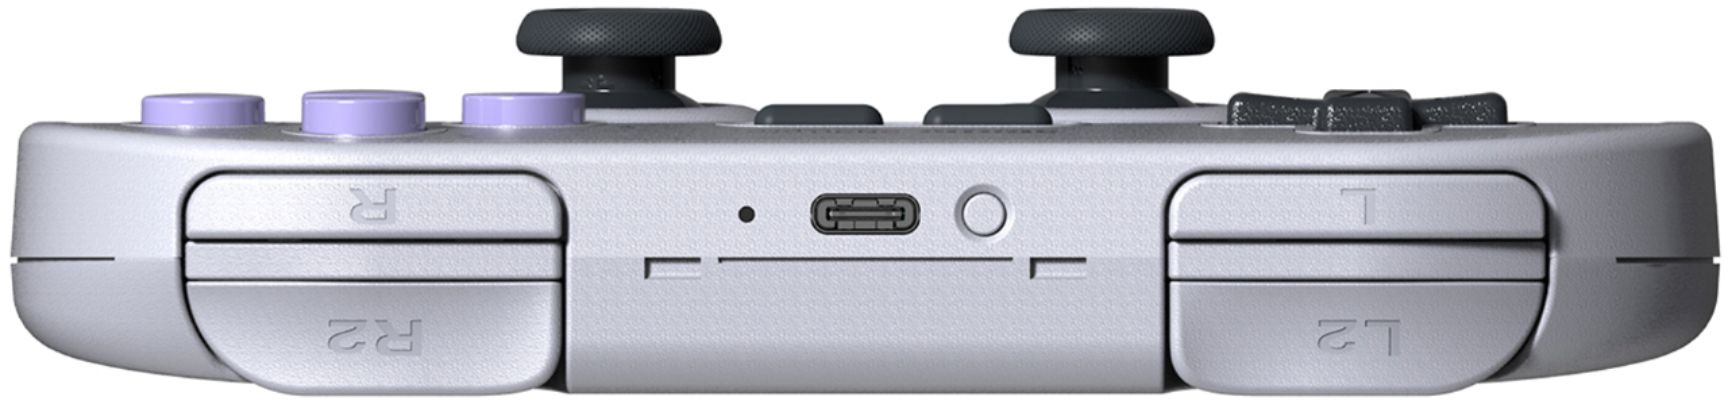 Customer Reviews 8bitdo Sn30 Pro Wireless Controller For Pc Mac Android And Nintendo Switch Gray 80dh Best Buy